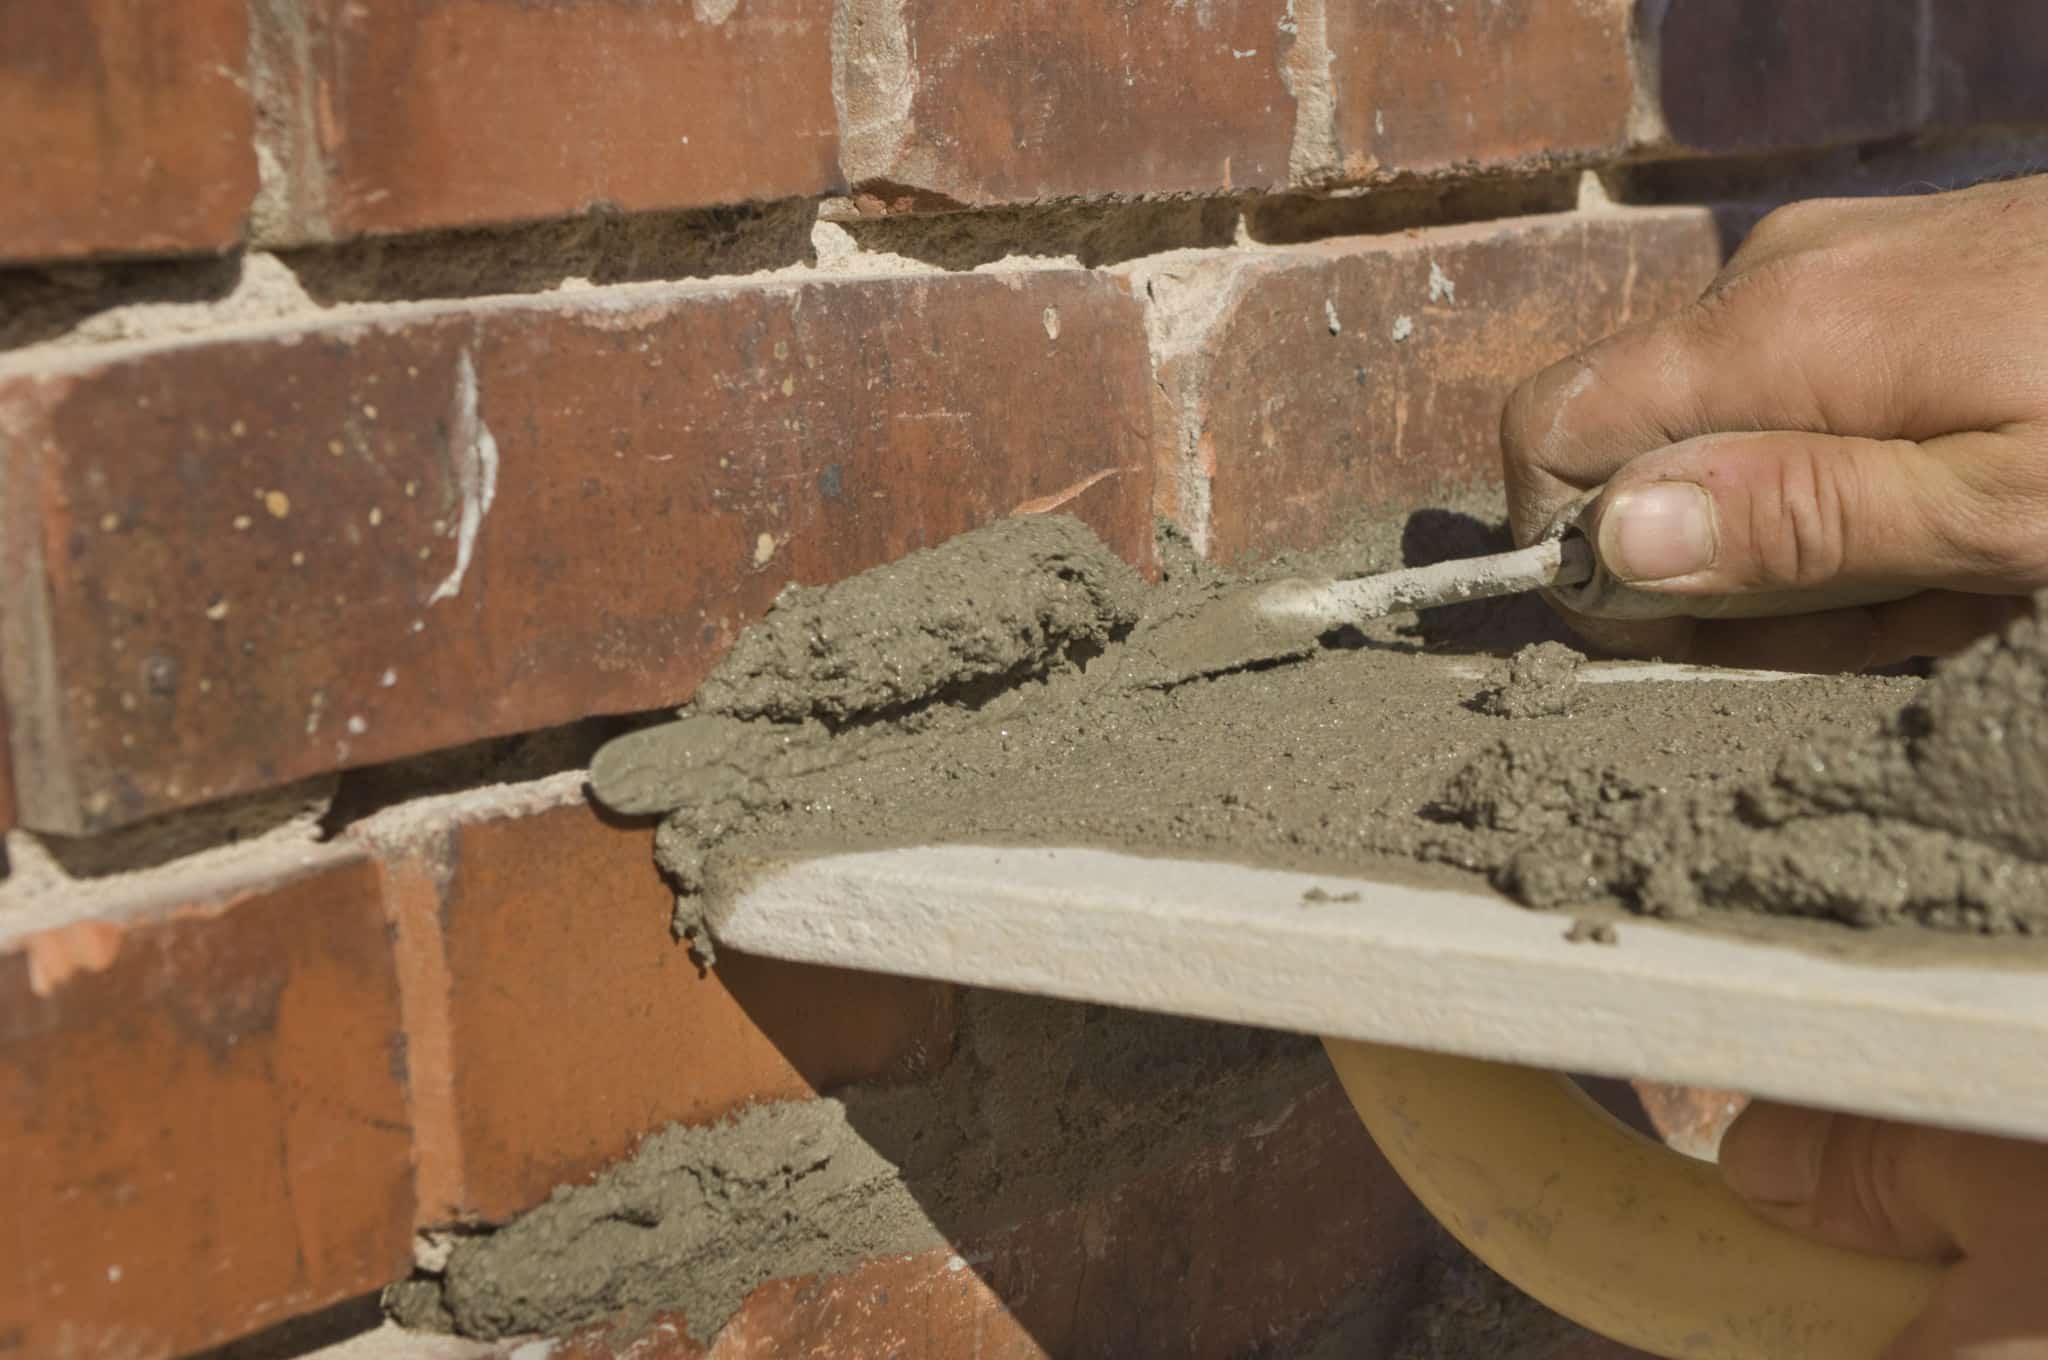 This image shows a close-up view of a persons hand applying mortar or cement between bricks during a masonry or bricklaying project The image captures the process of repairing or restoring a brick wall with the rough textured bricks and the wet gray mortar visible The focus is on the skilled hand work involved in the masonry repair highlighting the craftsmanship and attention to detail required for this type of construction work